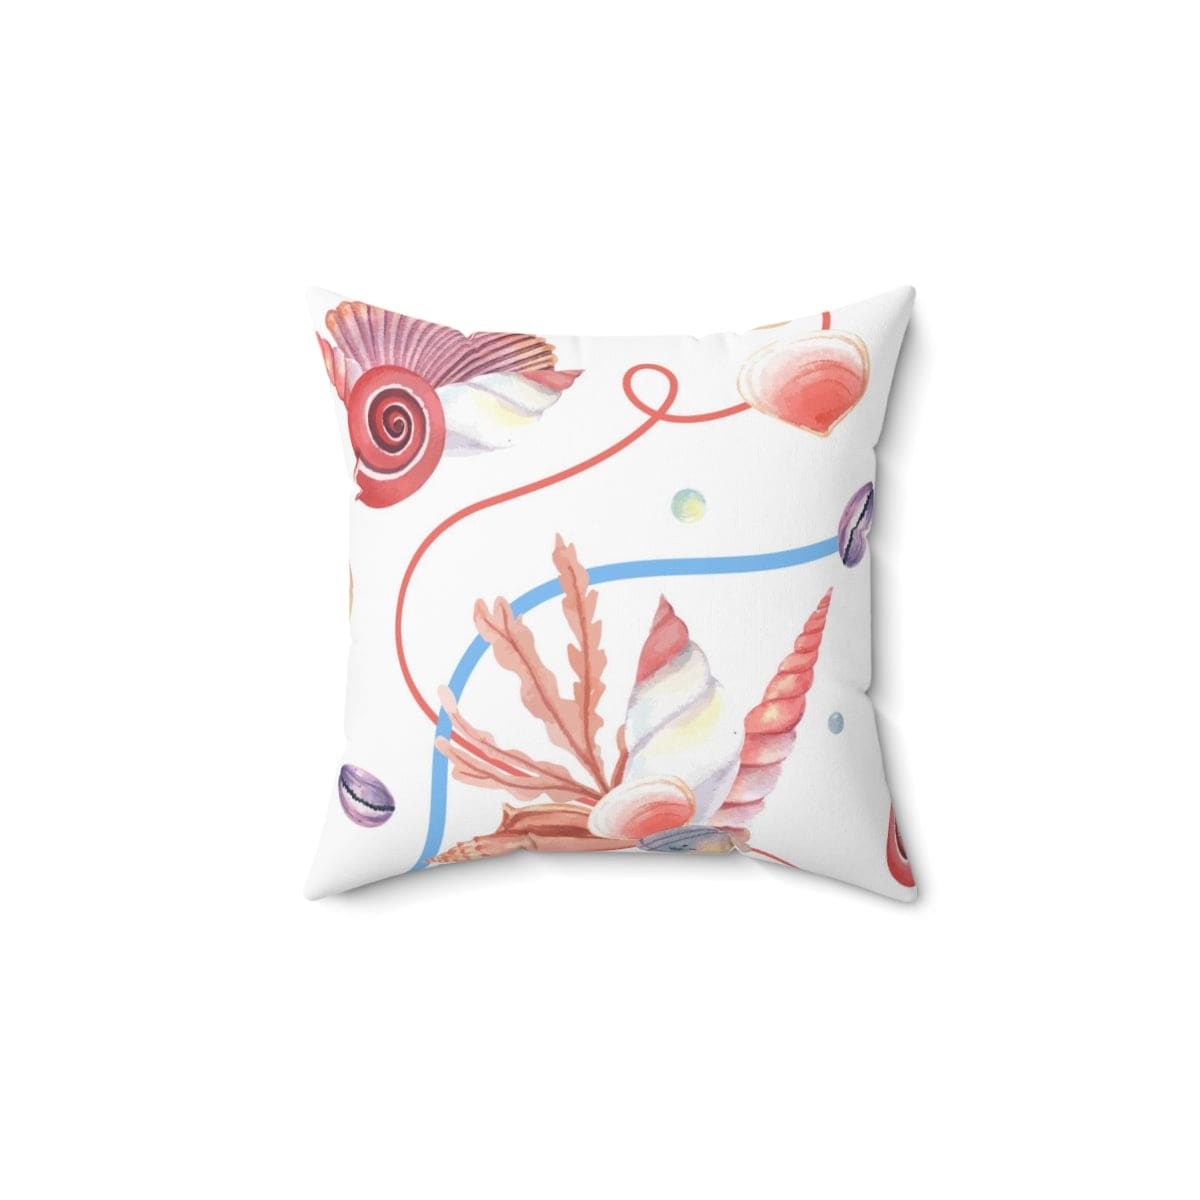 Decorative Throw Pillow Cover Beach Seashell Coral Pattern - Decorative | Throw